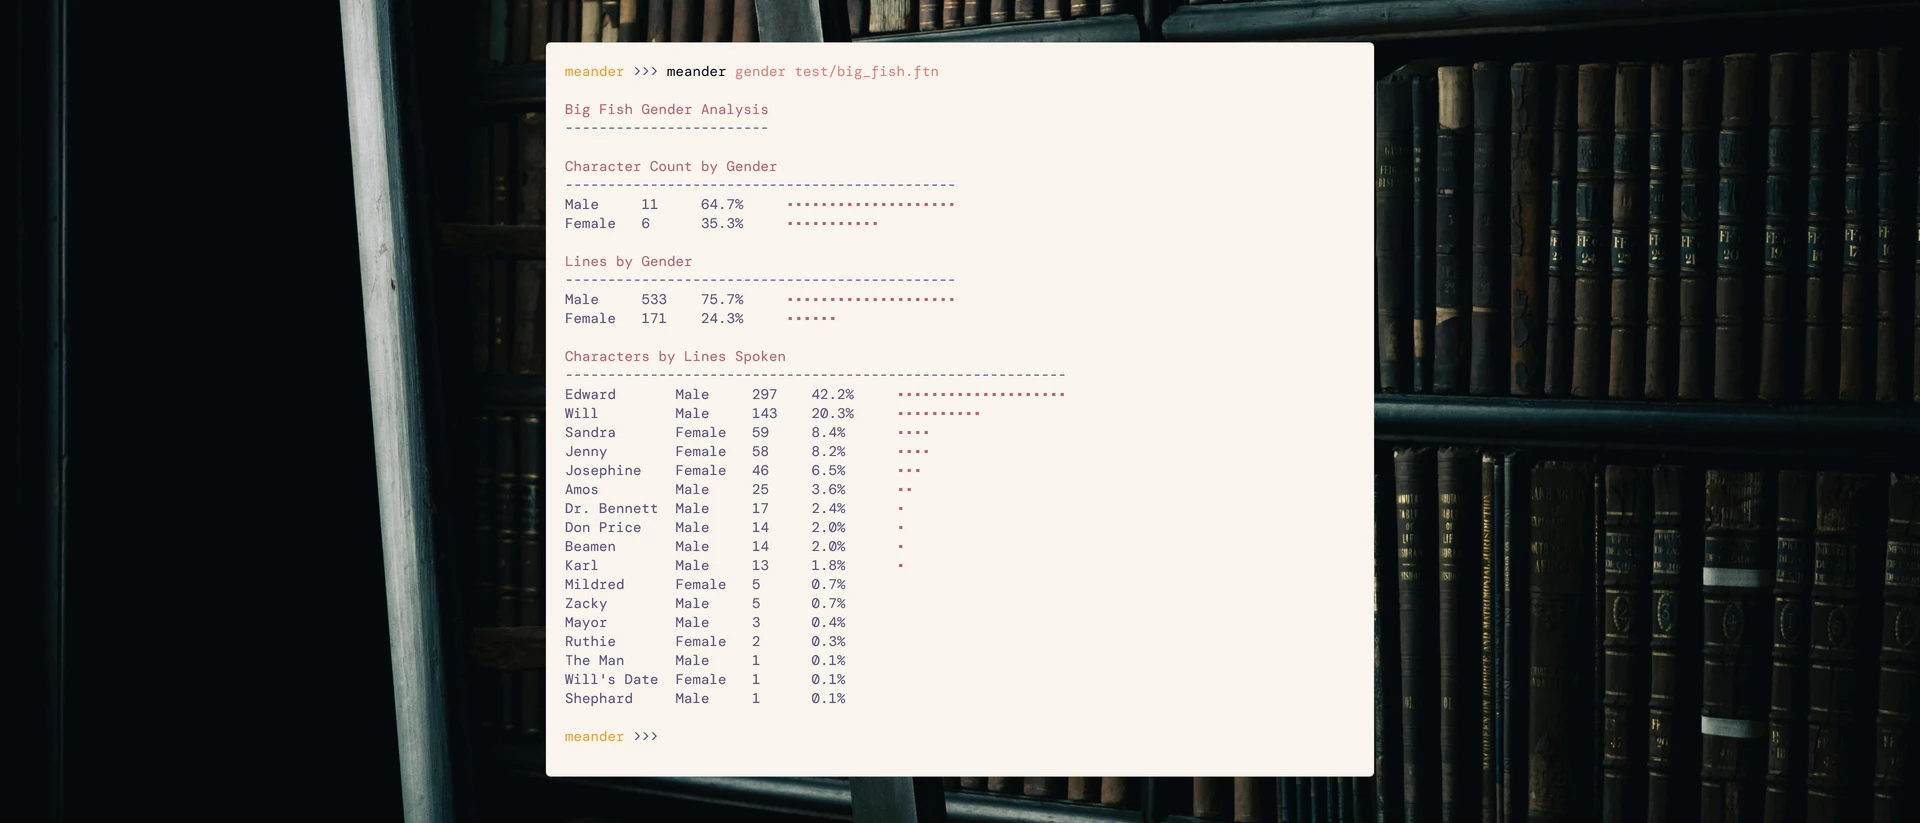 Screenshot of a computer terminal window displaying a breakdown of the lines spoken by characters in the film "Big Fish", with specific focus on their genders